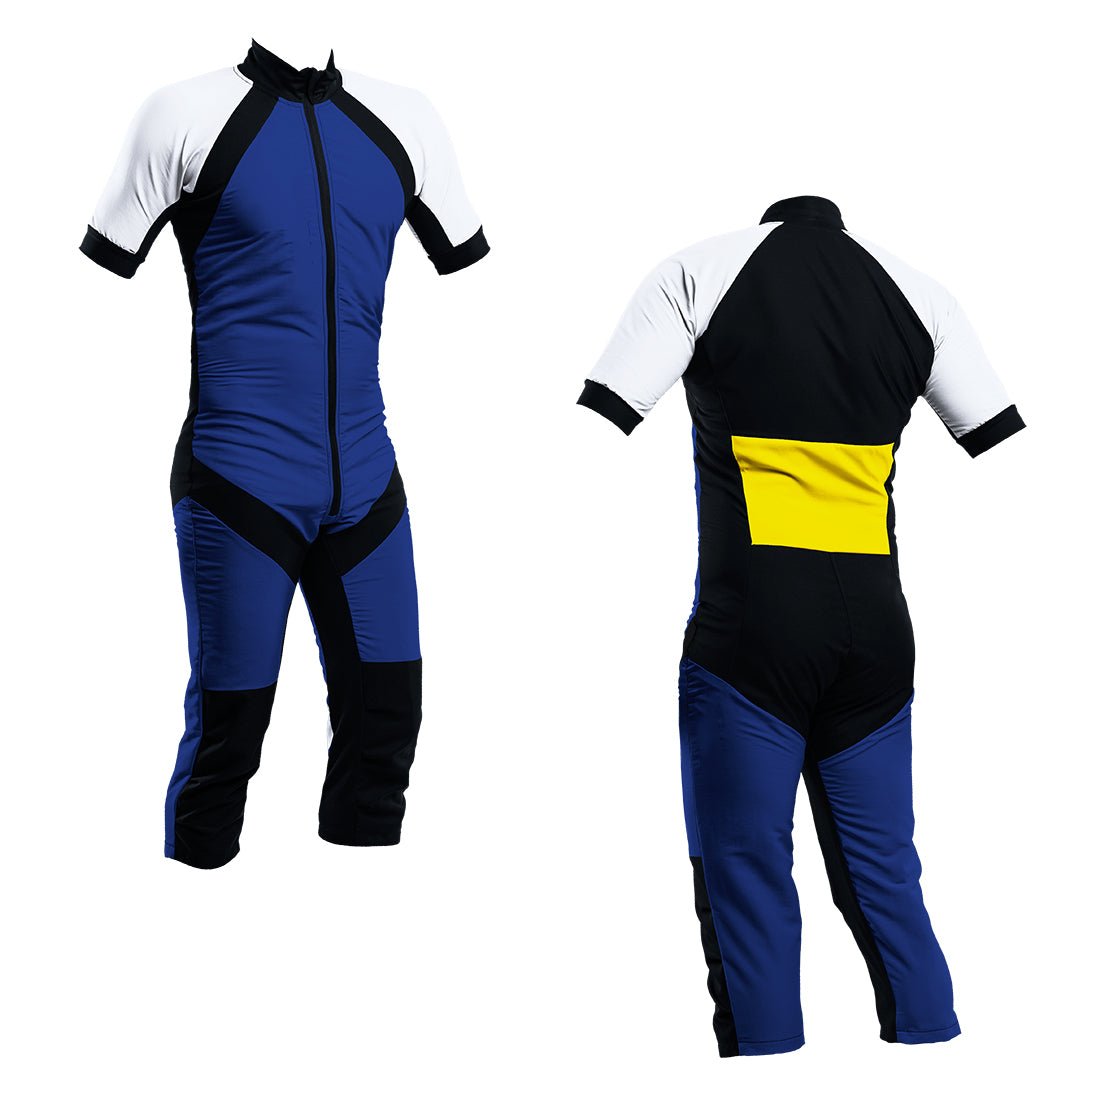 Skydiving Summer Suit Royal-White-Yellow S2-04